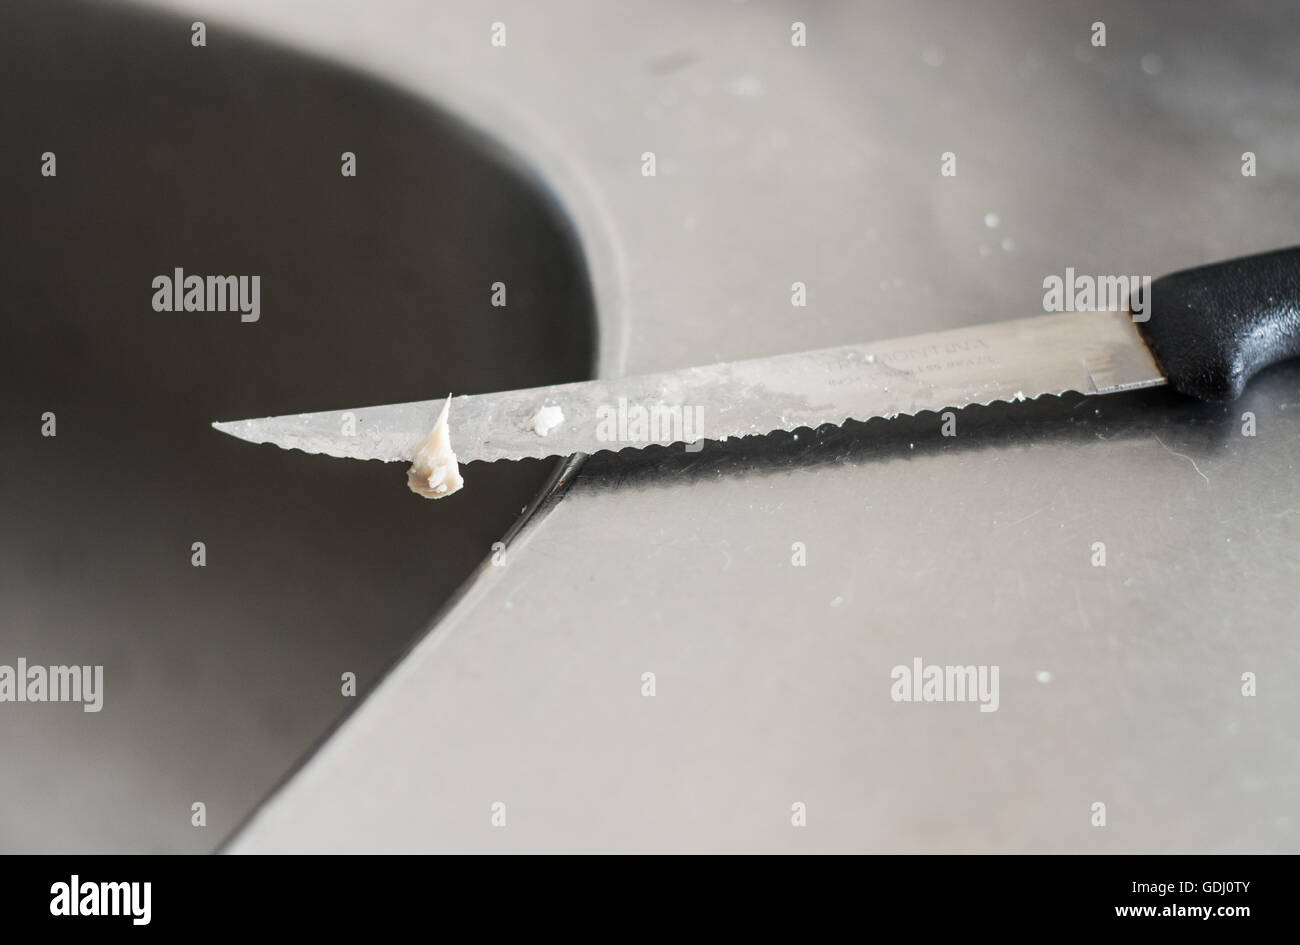 Dirty knife after cutting cheese Stock Photo